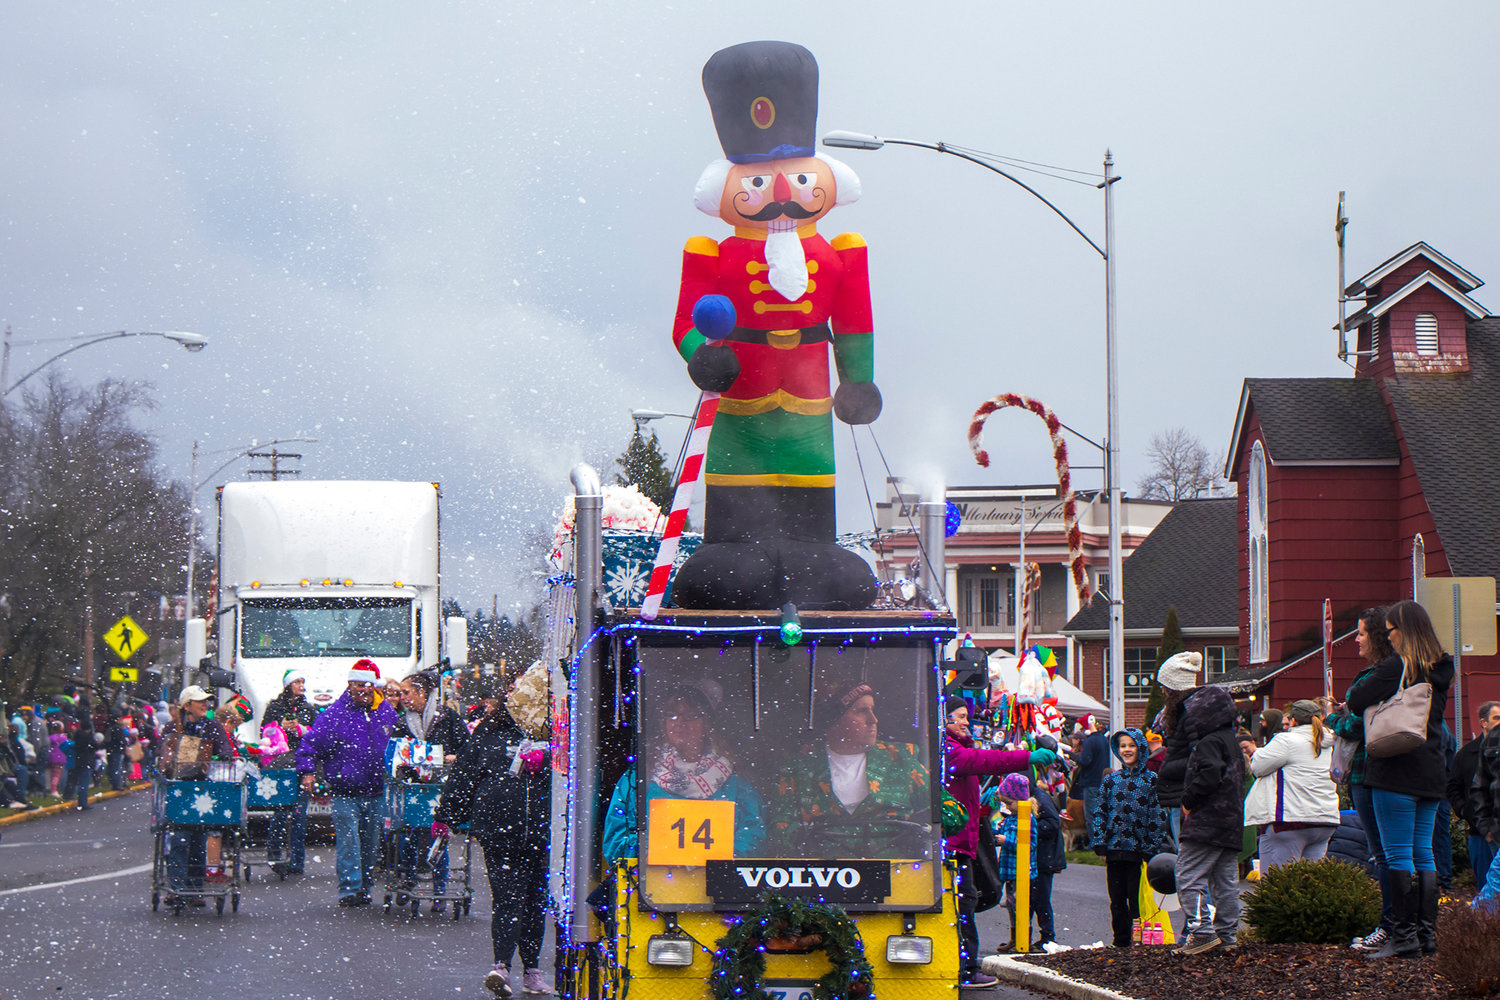 Fake snow rains down during the annual Santa Parade in downtown Chehalis in 2019.